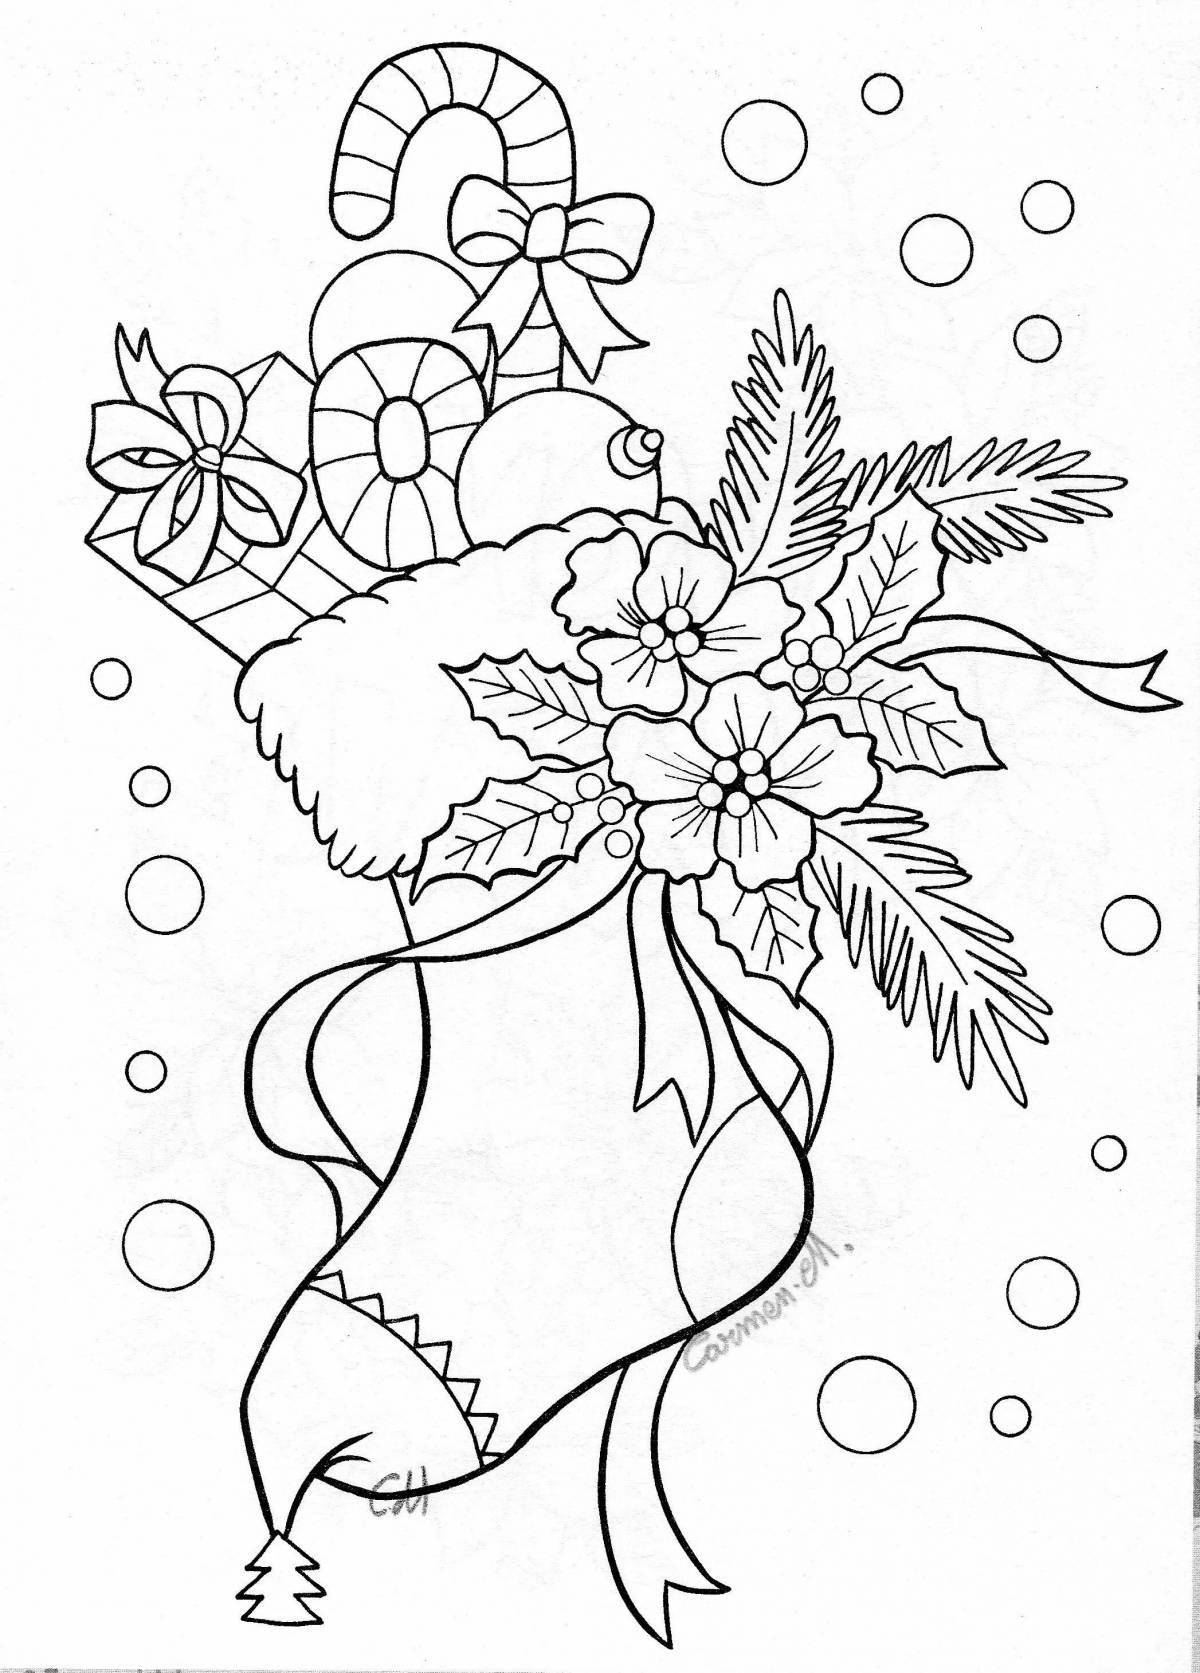 Fairytale coloring book mom for the new year